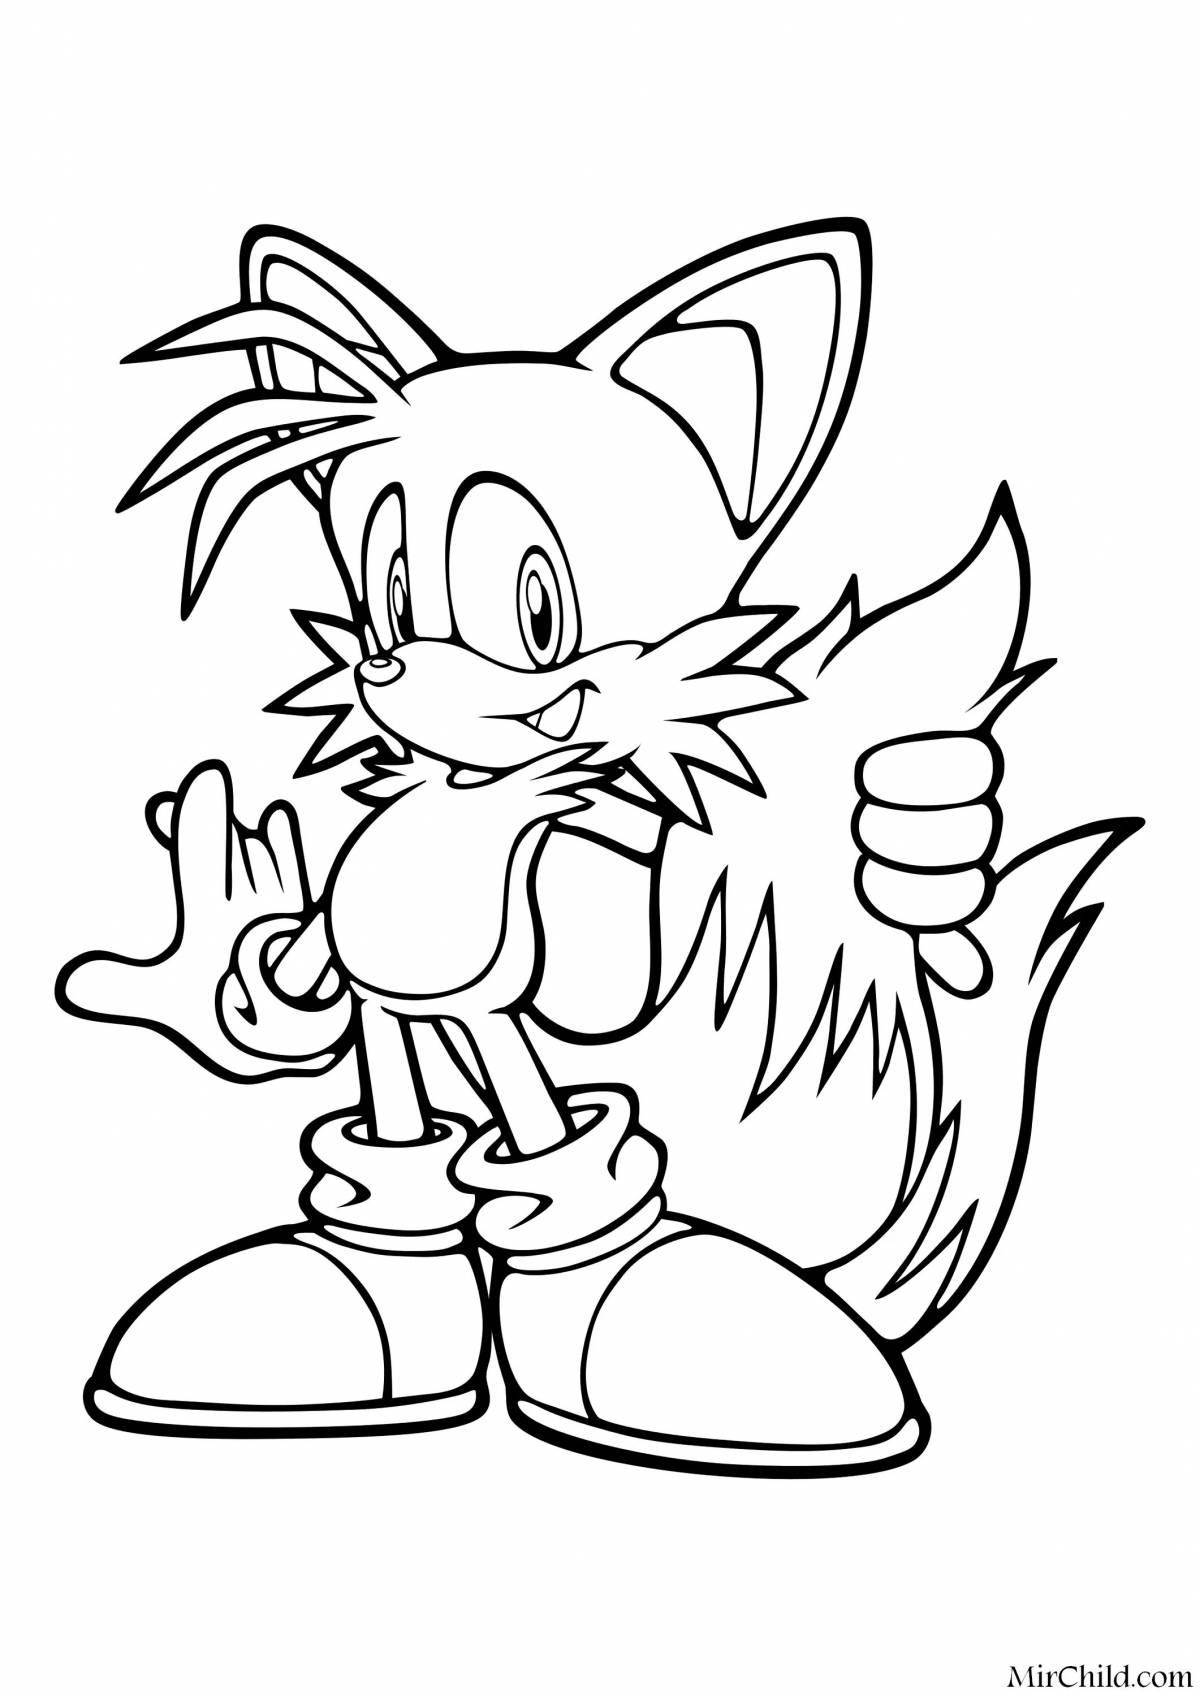 Sonic character coloring